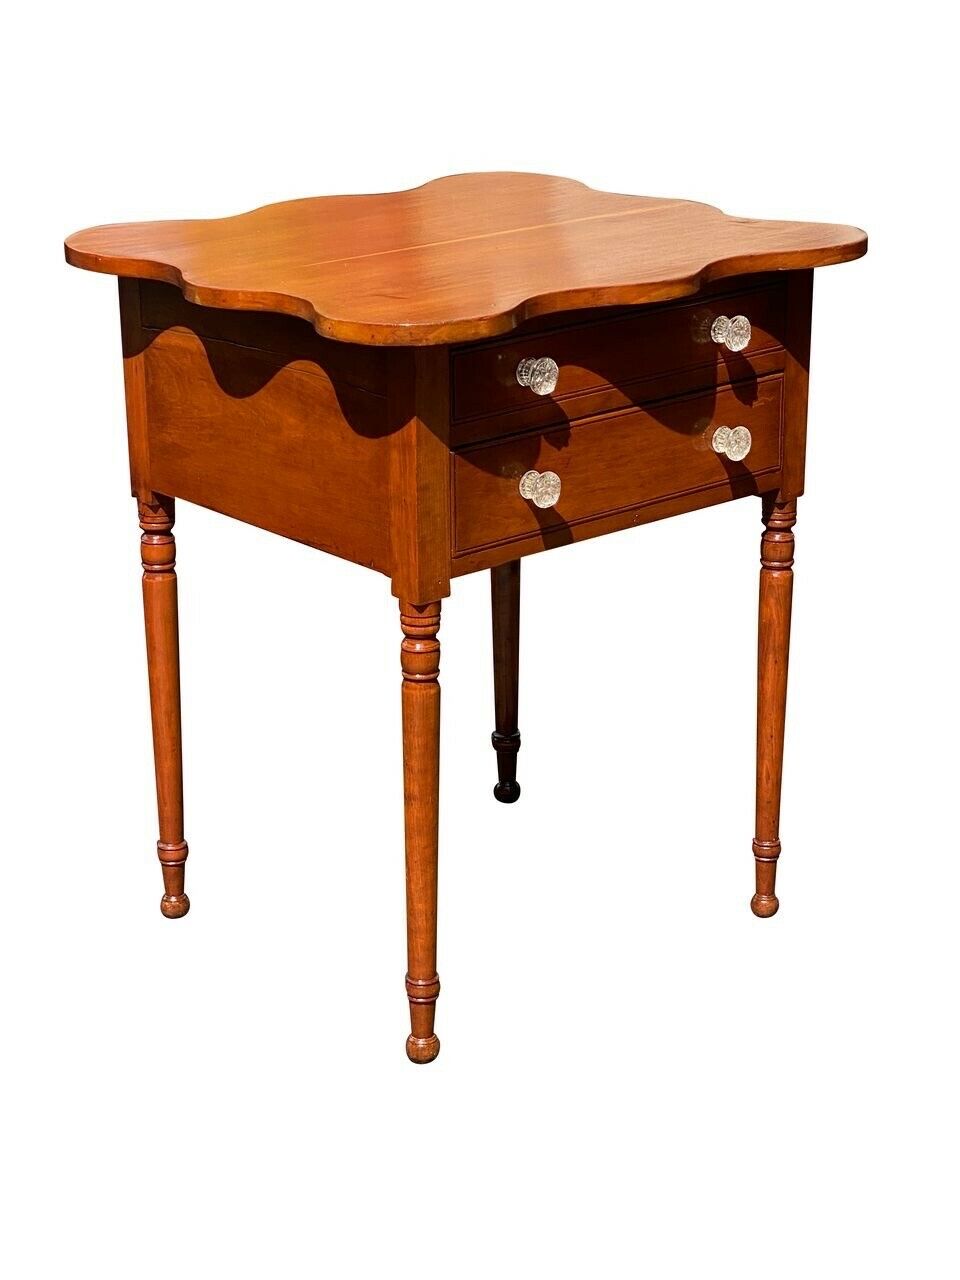 19TH C ANTIQUE SHERATON CONNECTICUT CHERRY WORK TABLE / NIGHT STAND W SHAPED TOP